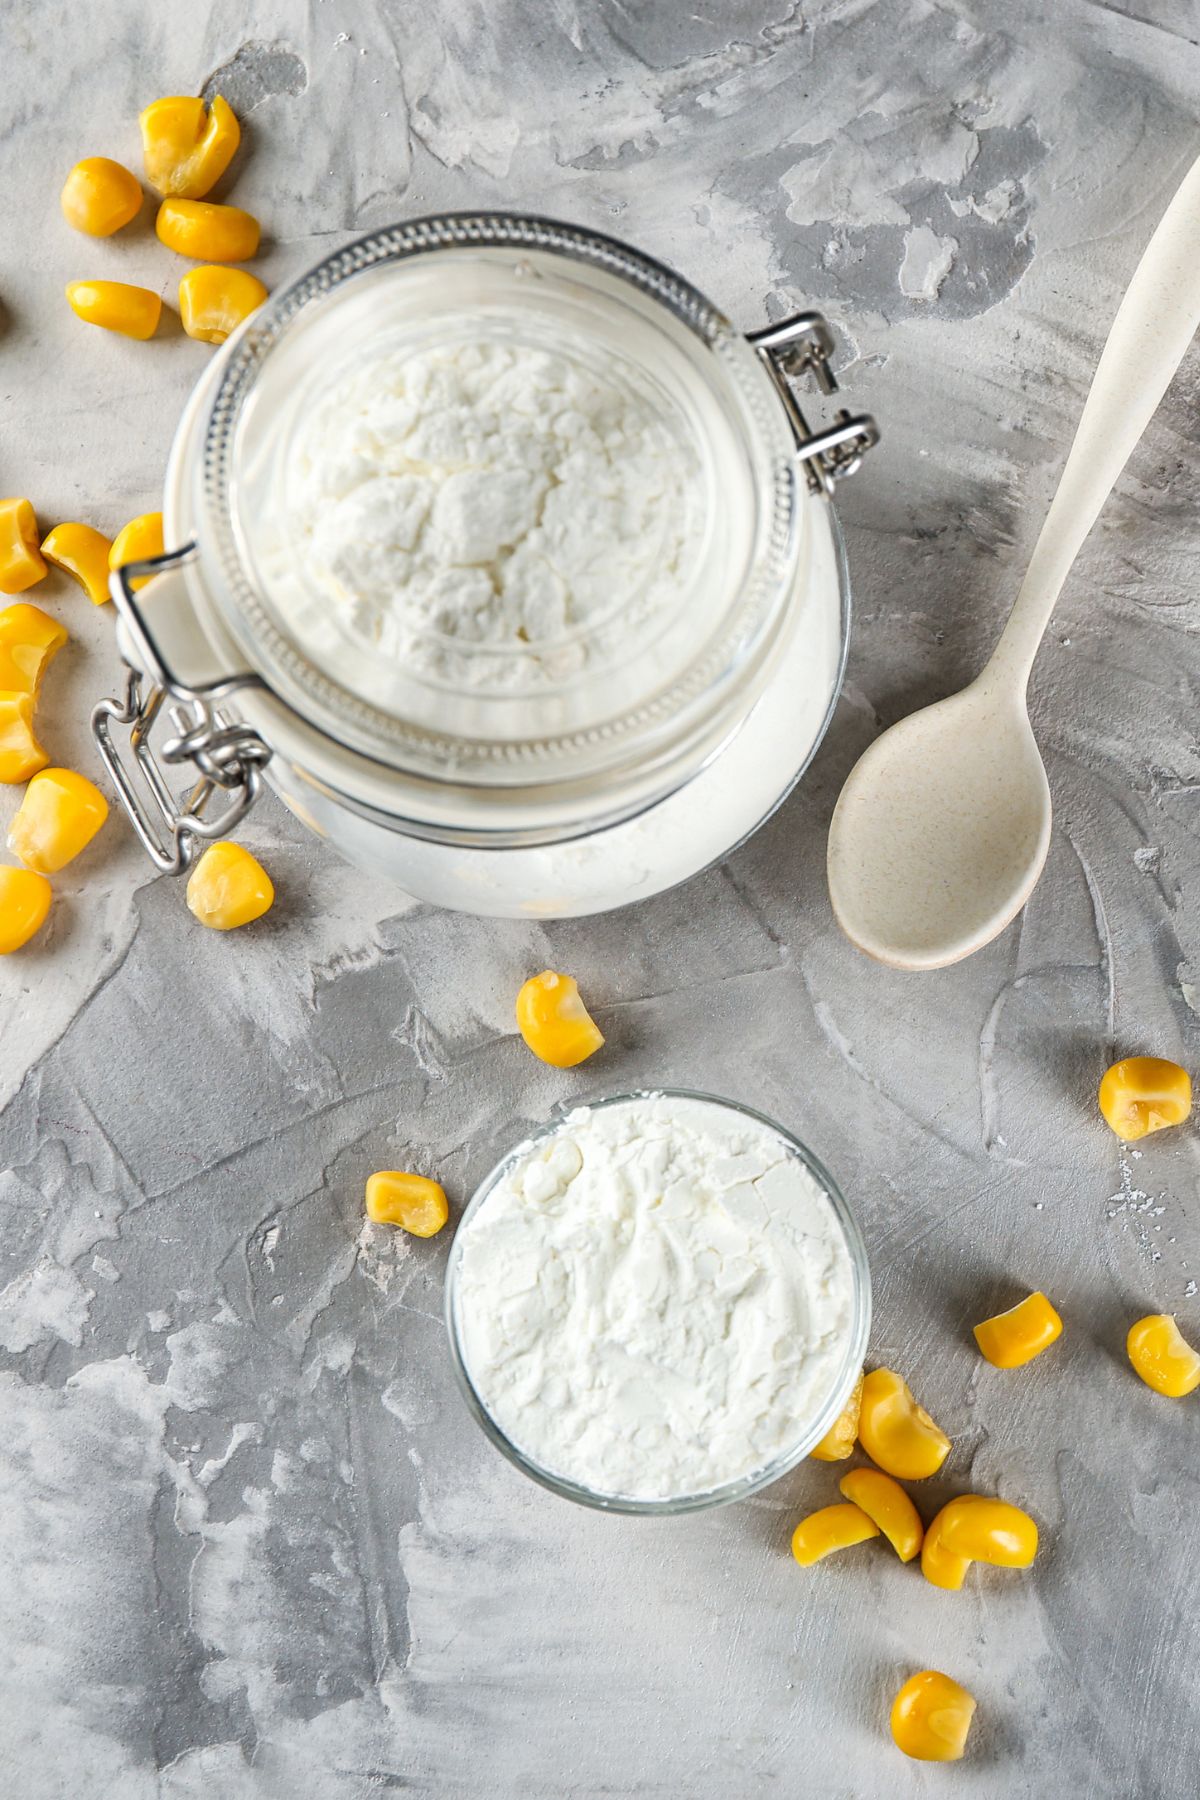 Jar of cornstarch with corn and spoon.